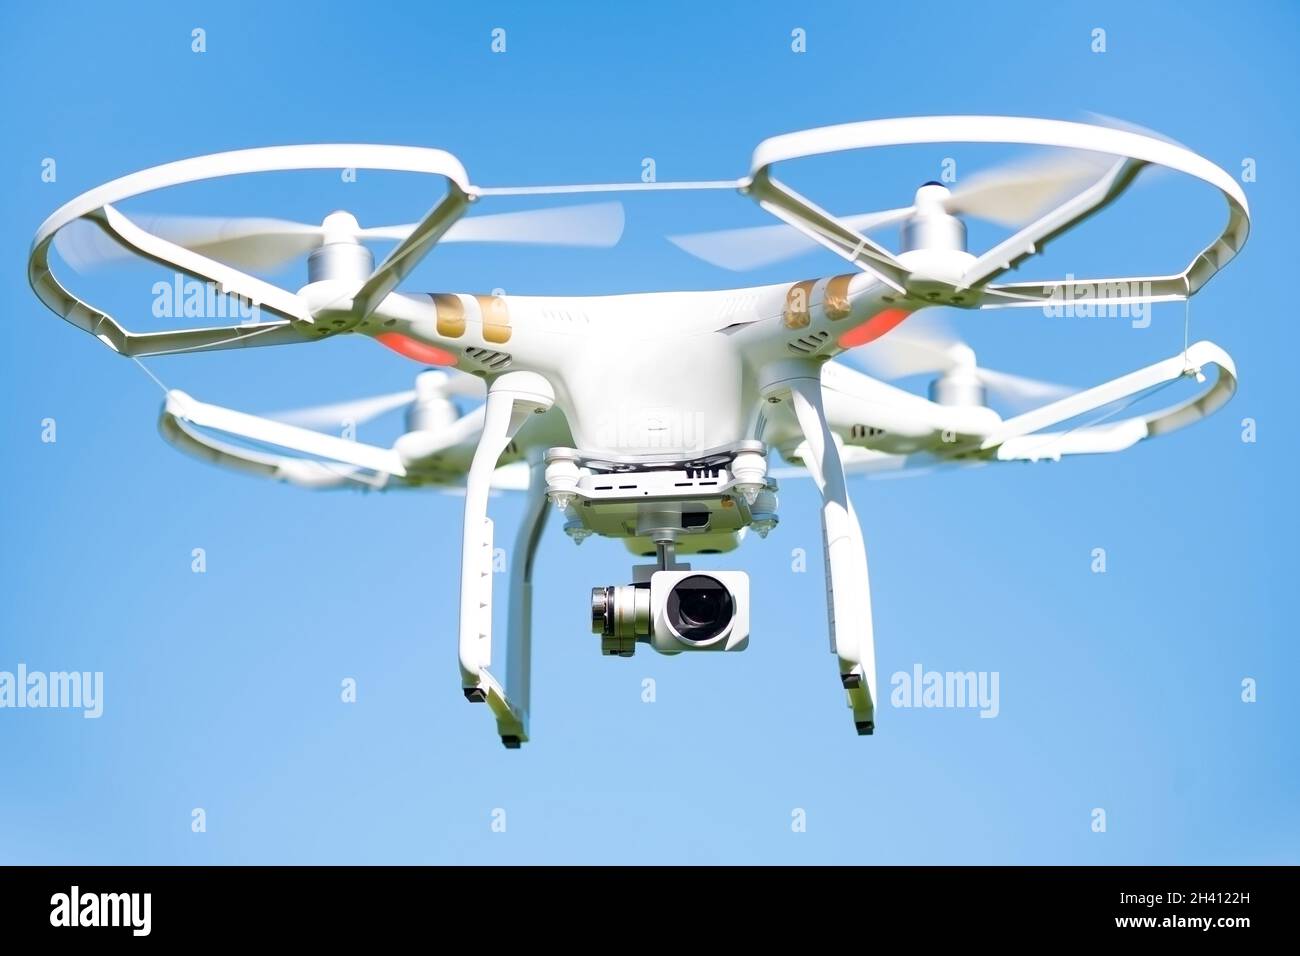 White drone flying high in the air, these unmanned aerial vehicles are intended for recreational and commercial aerial cinematography and photography Stock Photo